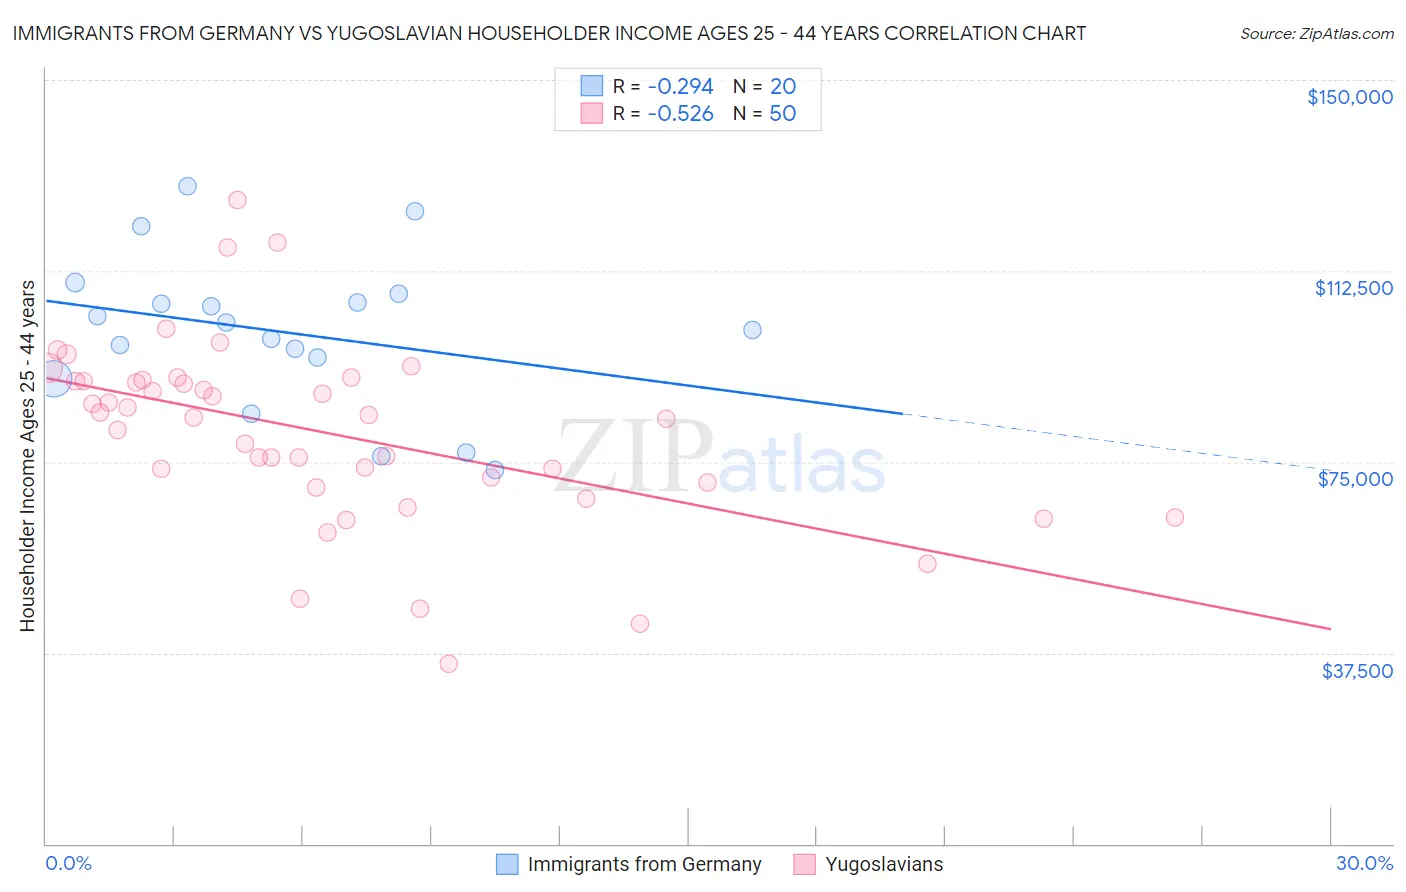 Immigrants from Germany vs Yugoslavian Householder Income Ages 25 - 44 years